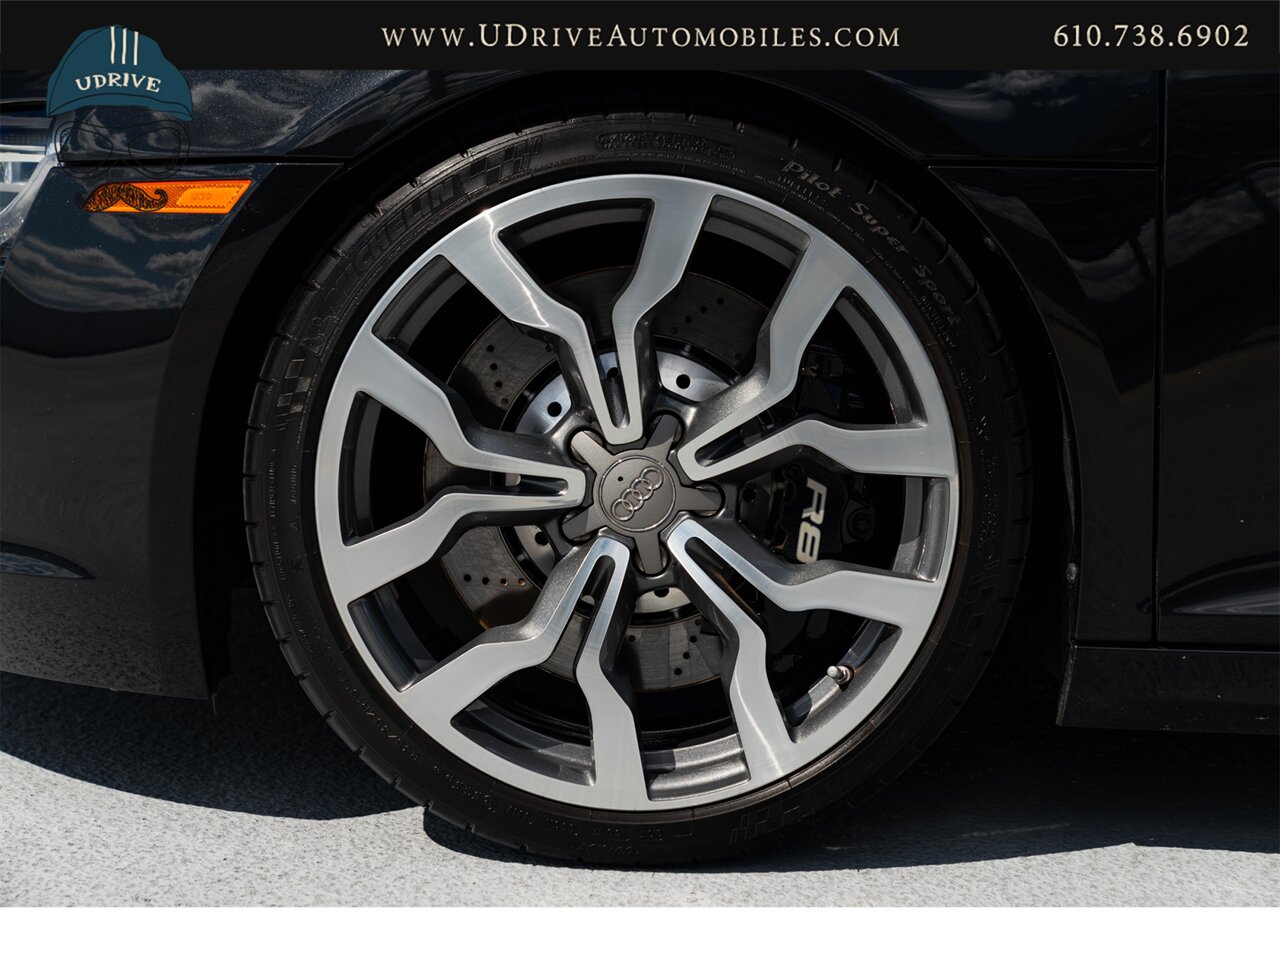 2011 Audi R8 5.2 Quattro  V10 6 Speed Manual - Photo 49 - West Chester, PA 19382